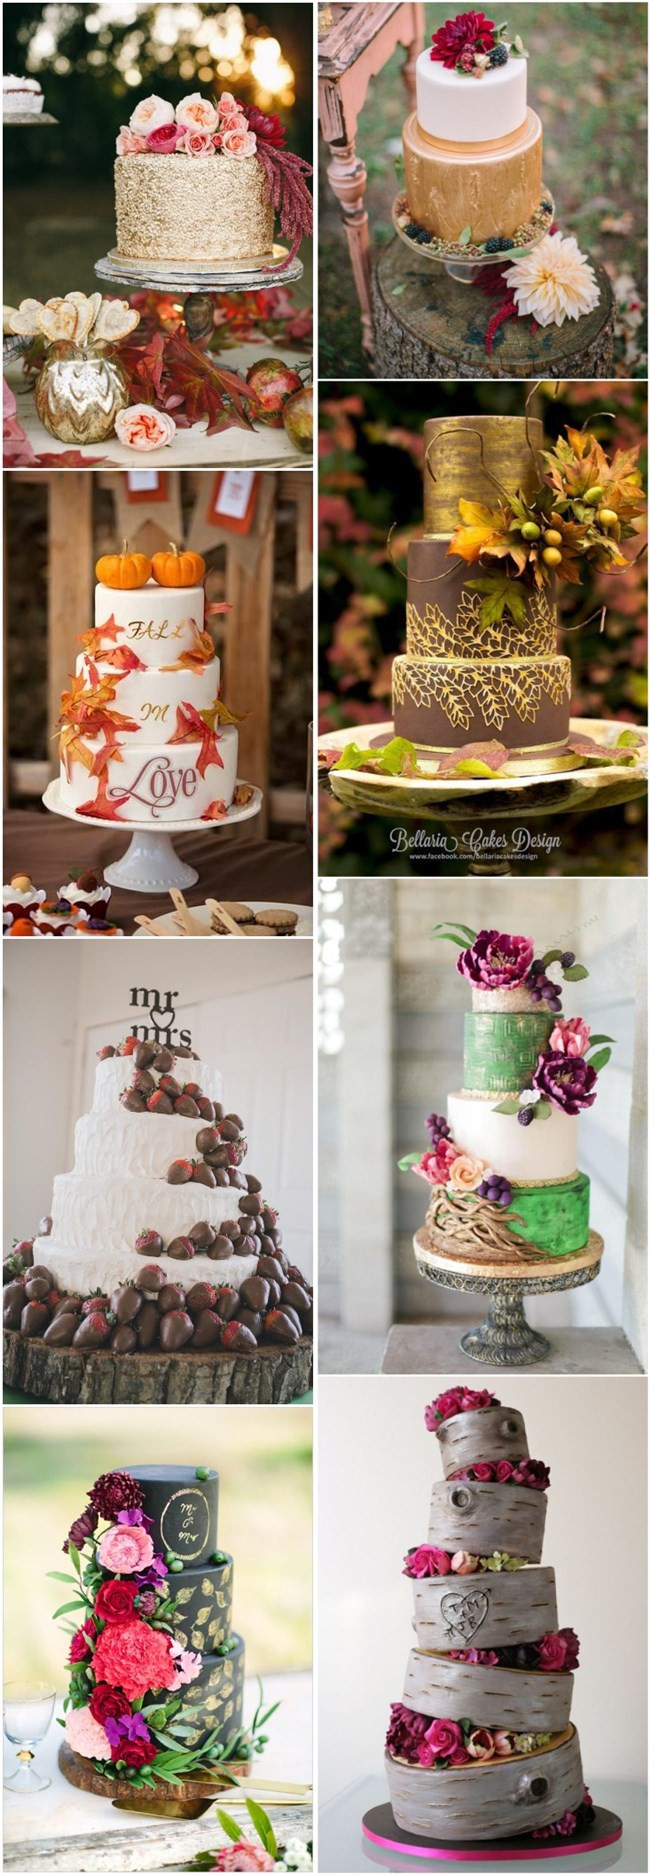 Simple Fall Wedding Cakes
 45 Incredible Fall Wedding Cakes that WOW